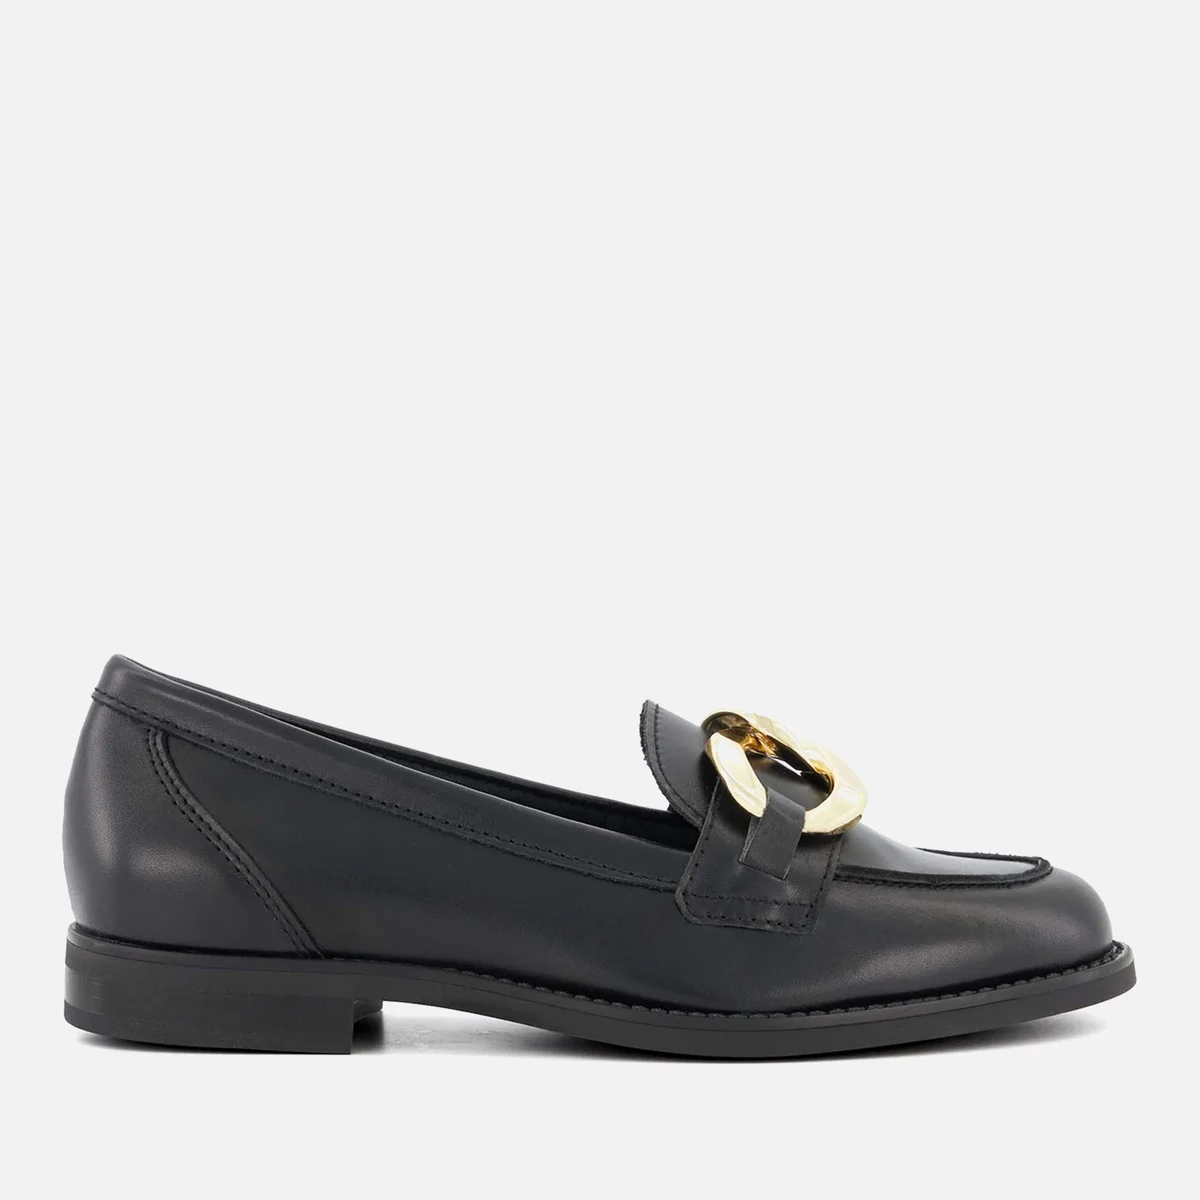 Dune Women's Goddess Leather Loafers Image 1